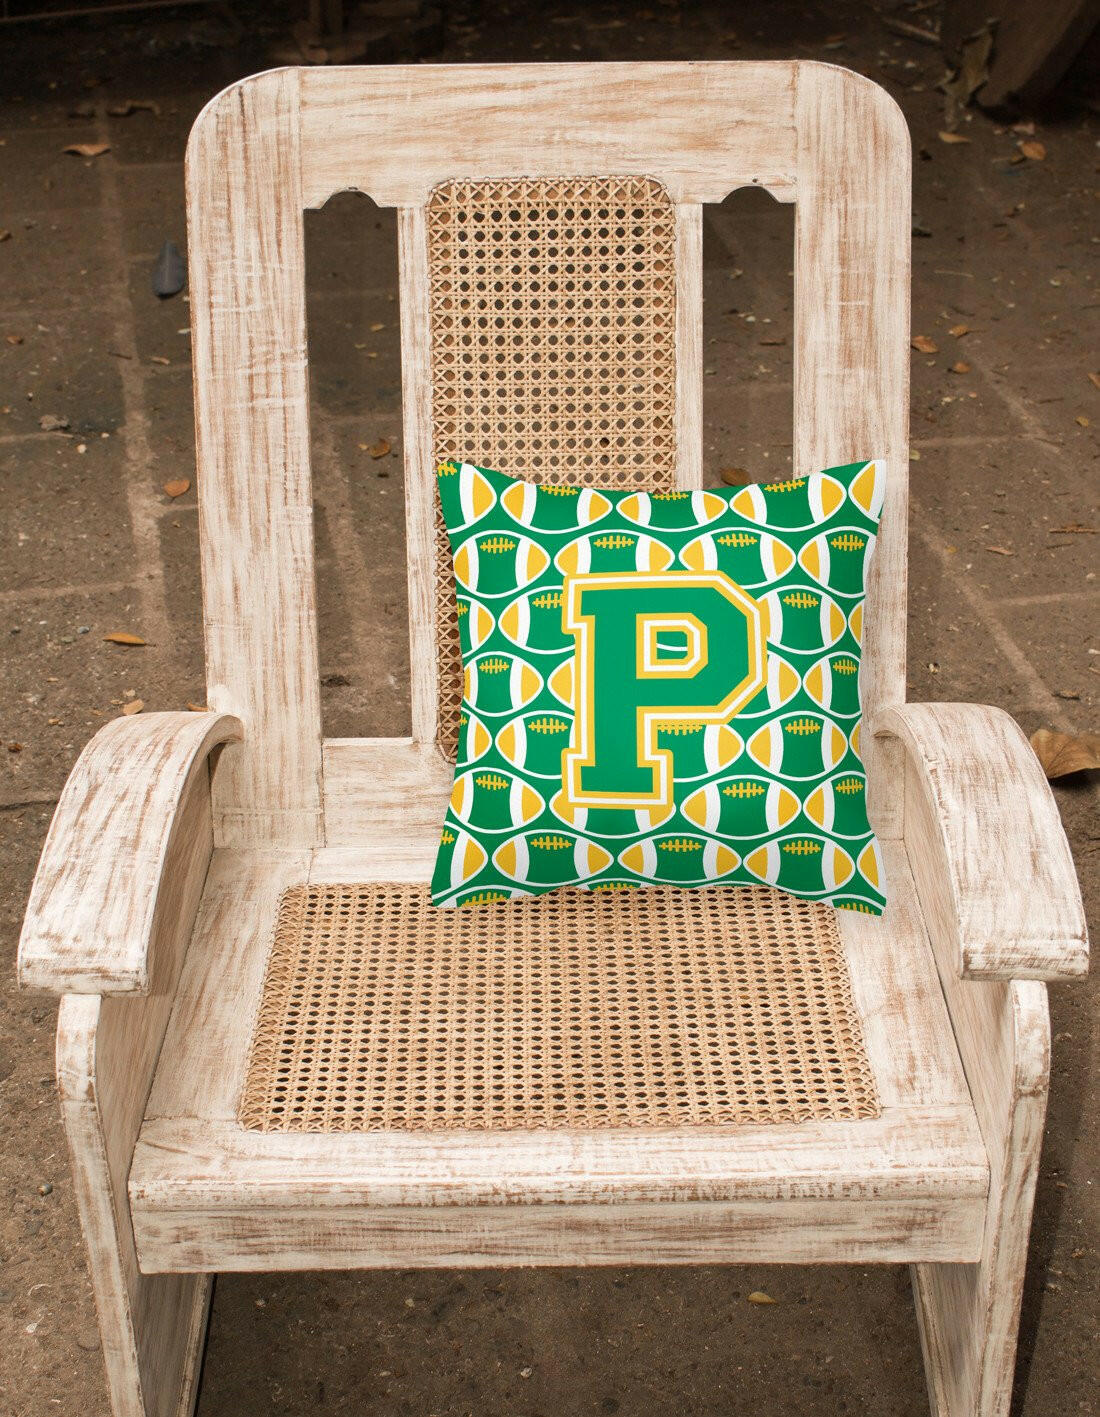 Letter P Football Green and Gold Fabric Decorative Pillow CJ1069-PPW1414 by Caroline's Treasures